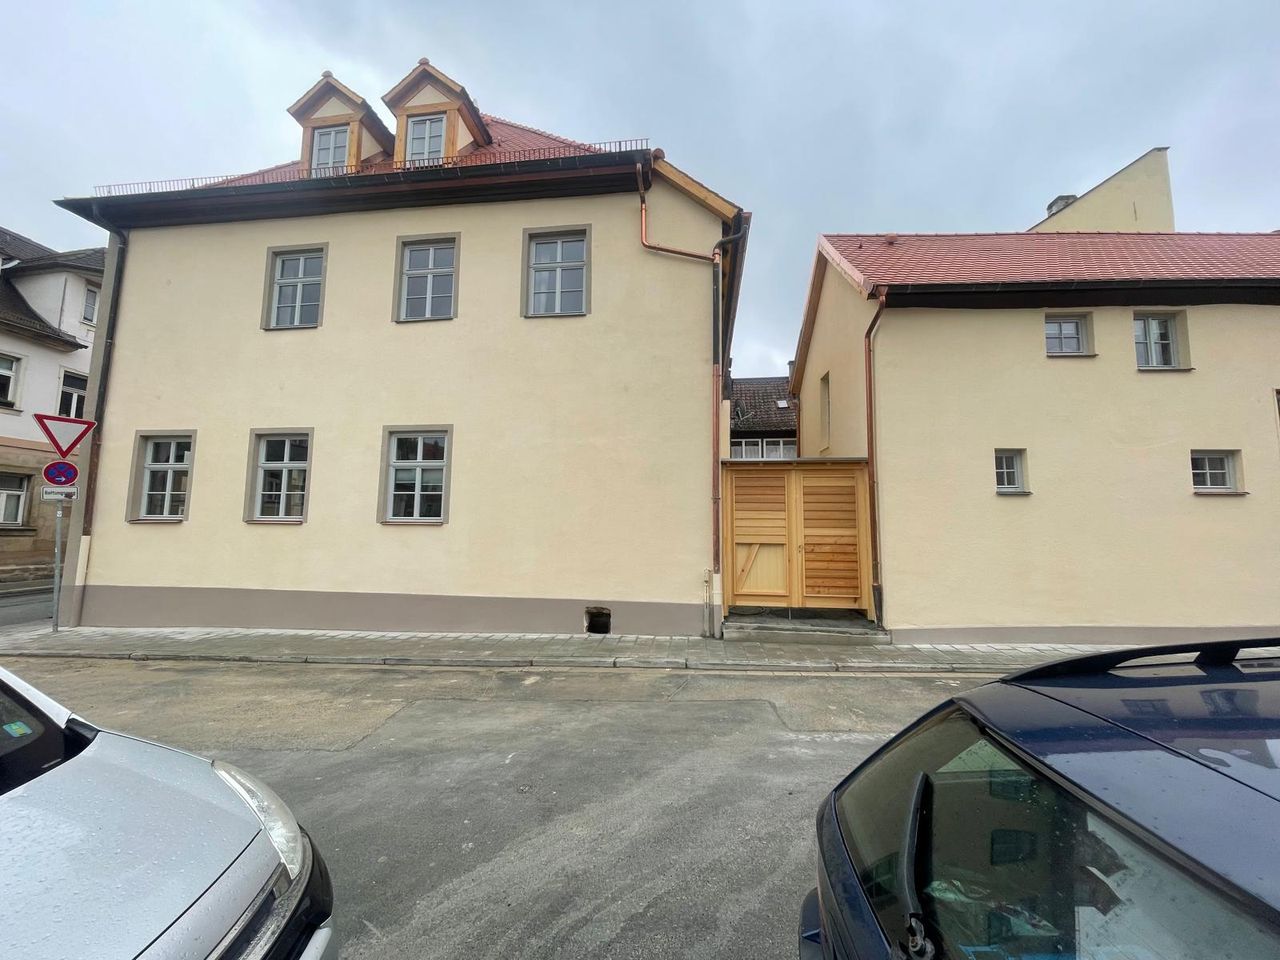 Spacious 2.5-room apartment (1st floor), contract with extension option, first occupancy, fully furnished, central, old town of Erlangen (price incl. 7 % VAT)